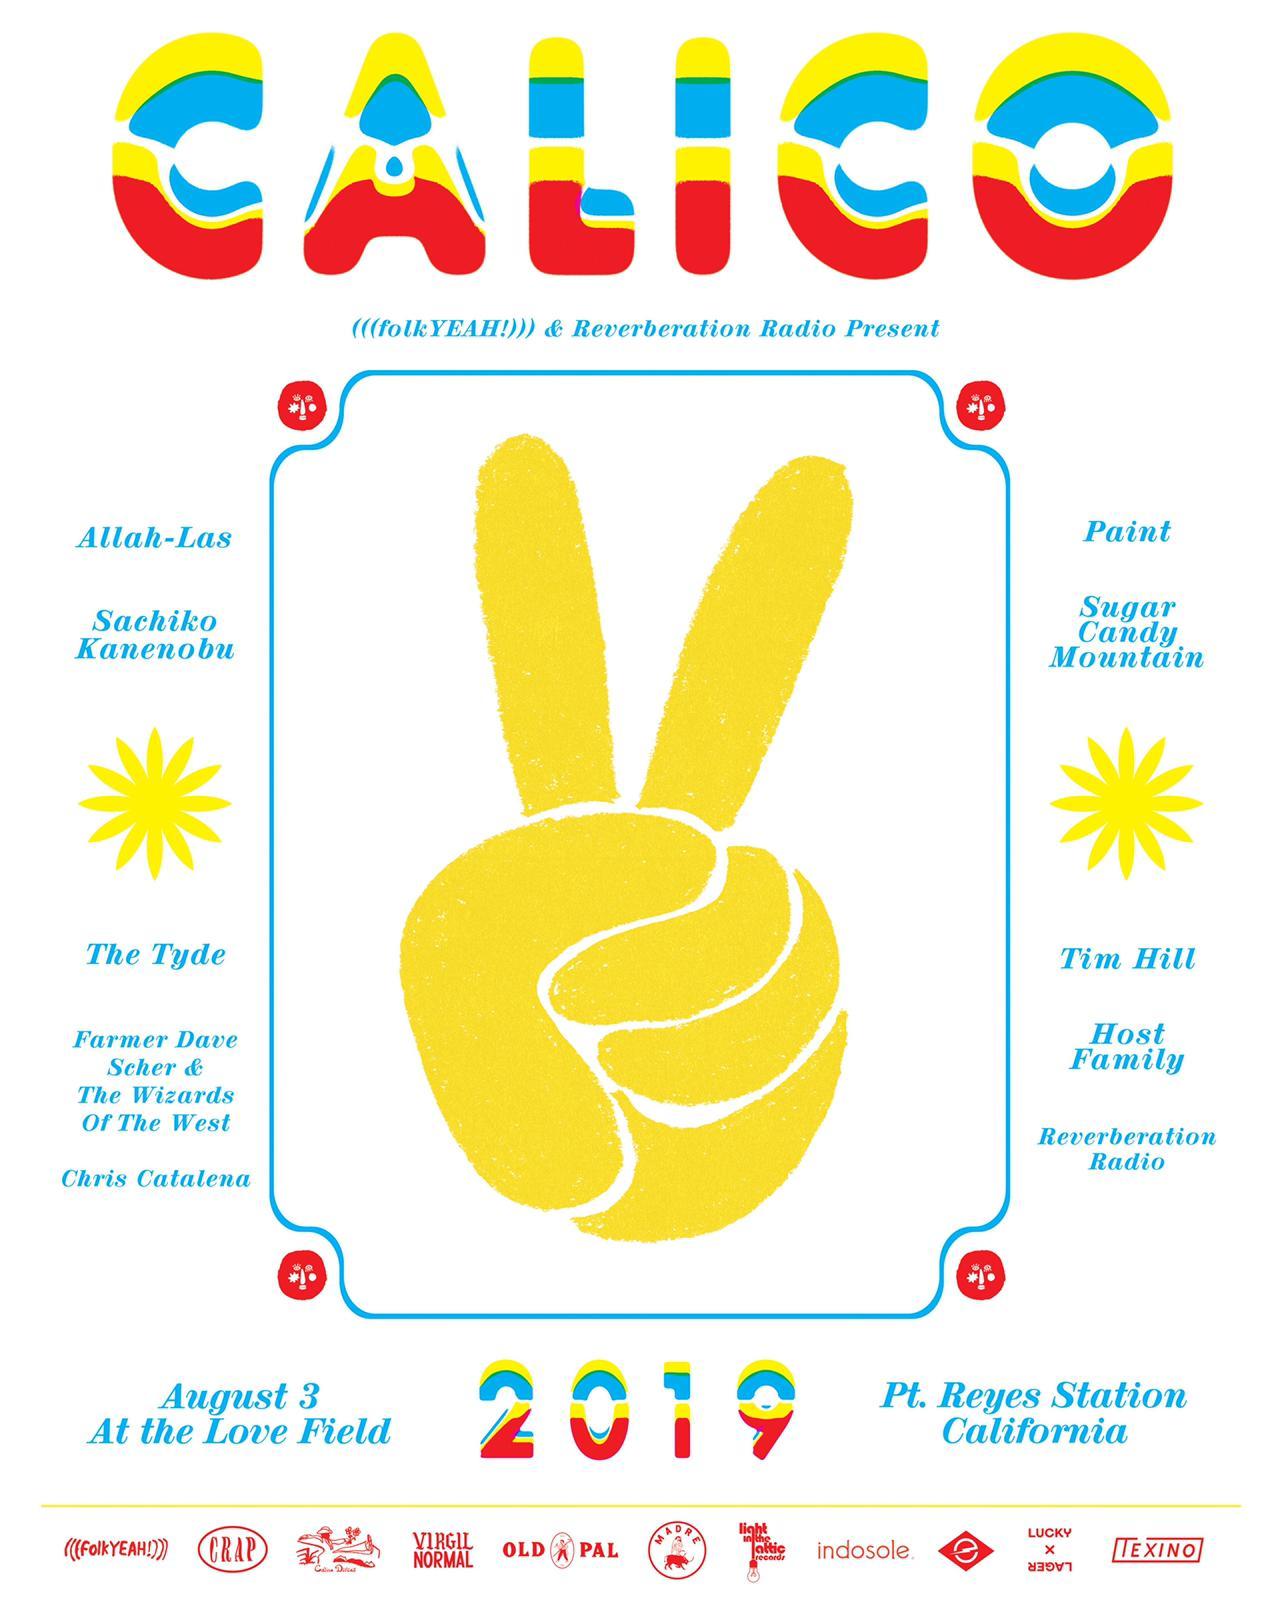 CALICO 2019 Presented by Reverberation Radio and Folkyeah